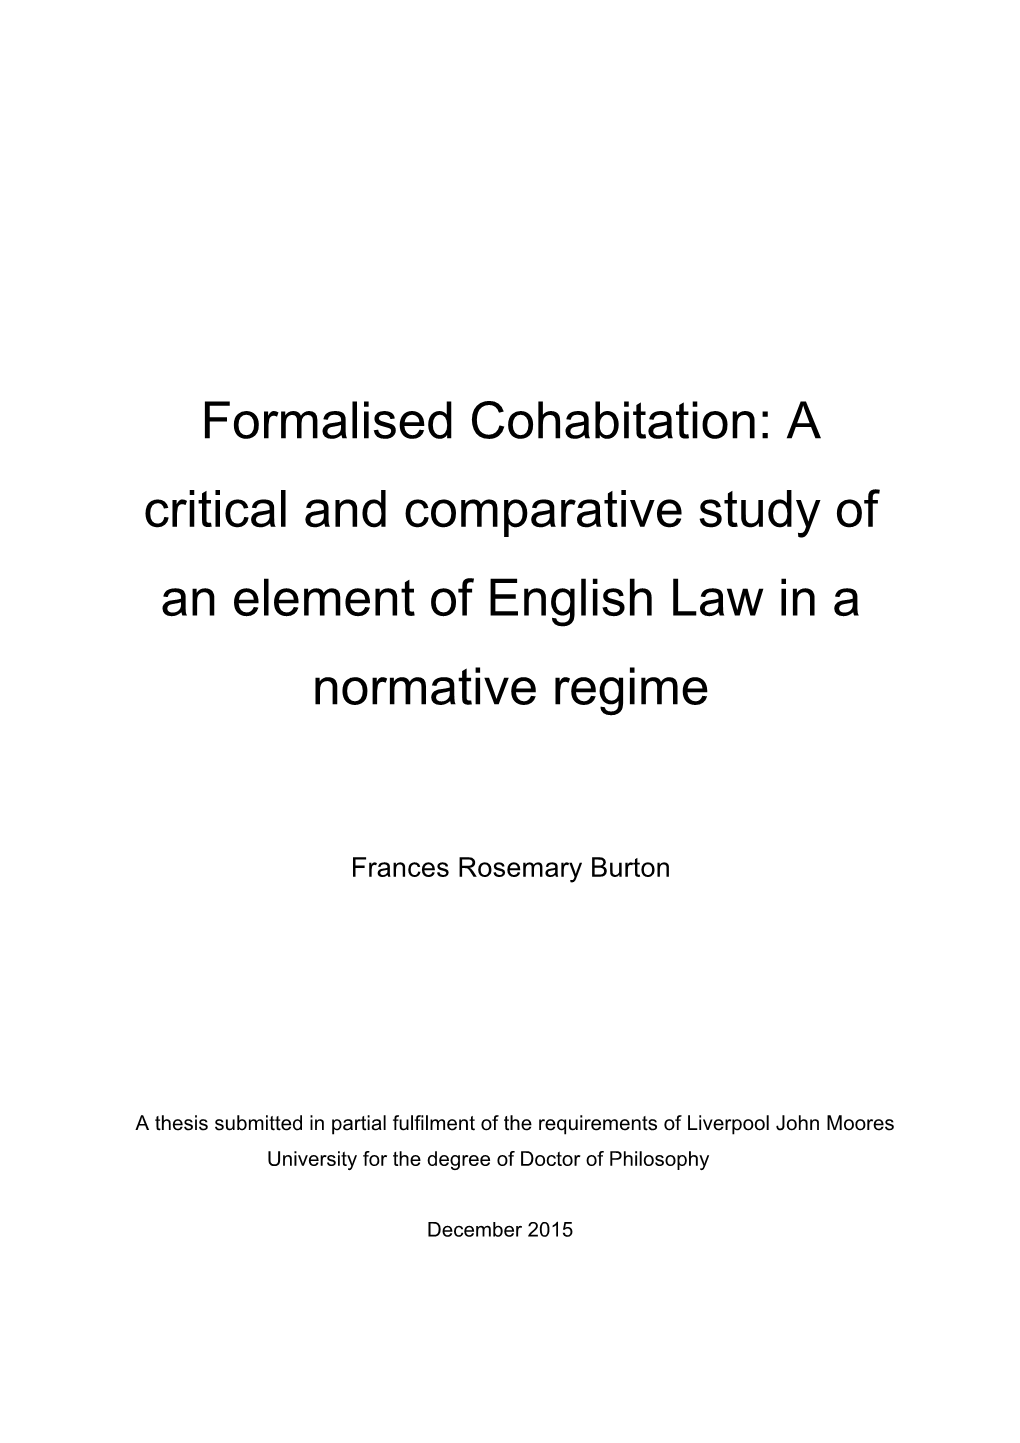 Formalised Cohabitation: a Critical and Comparative Study of an Element of English Law in a Normative Regime